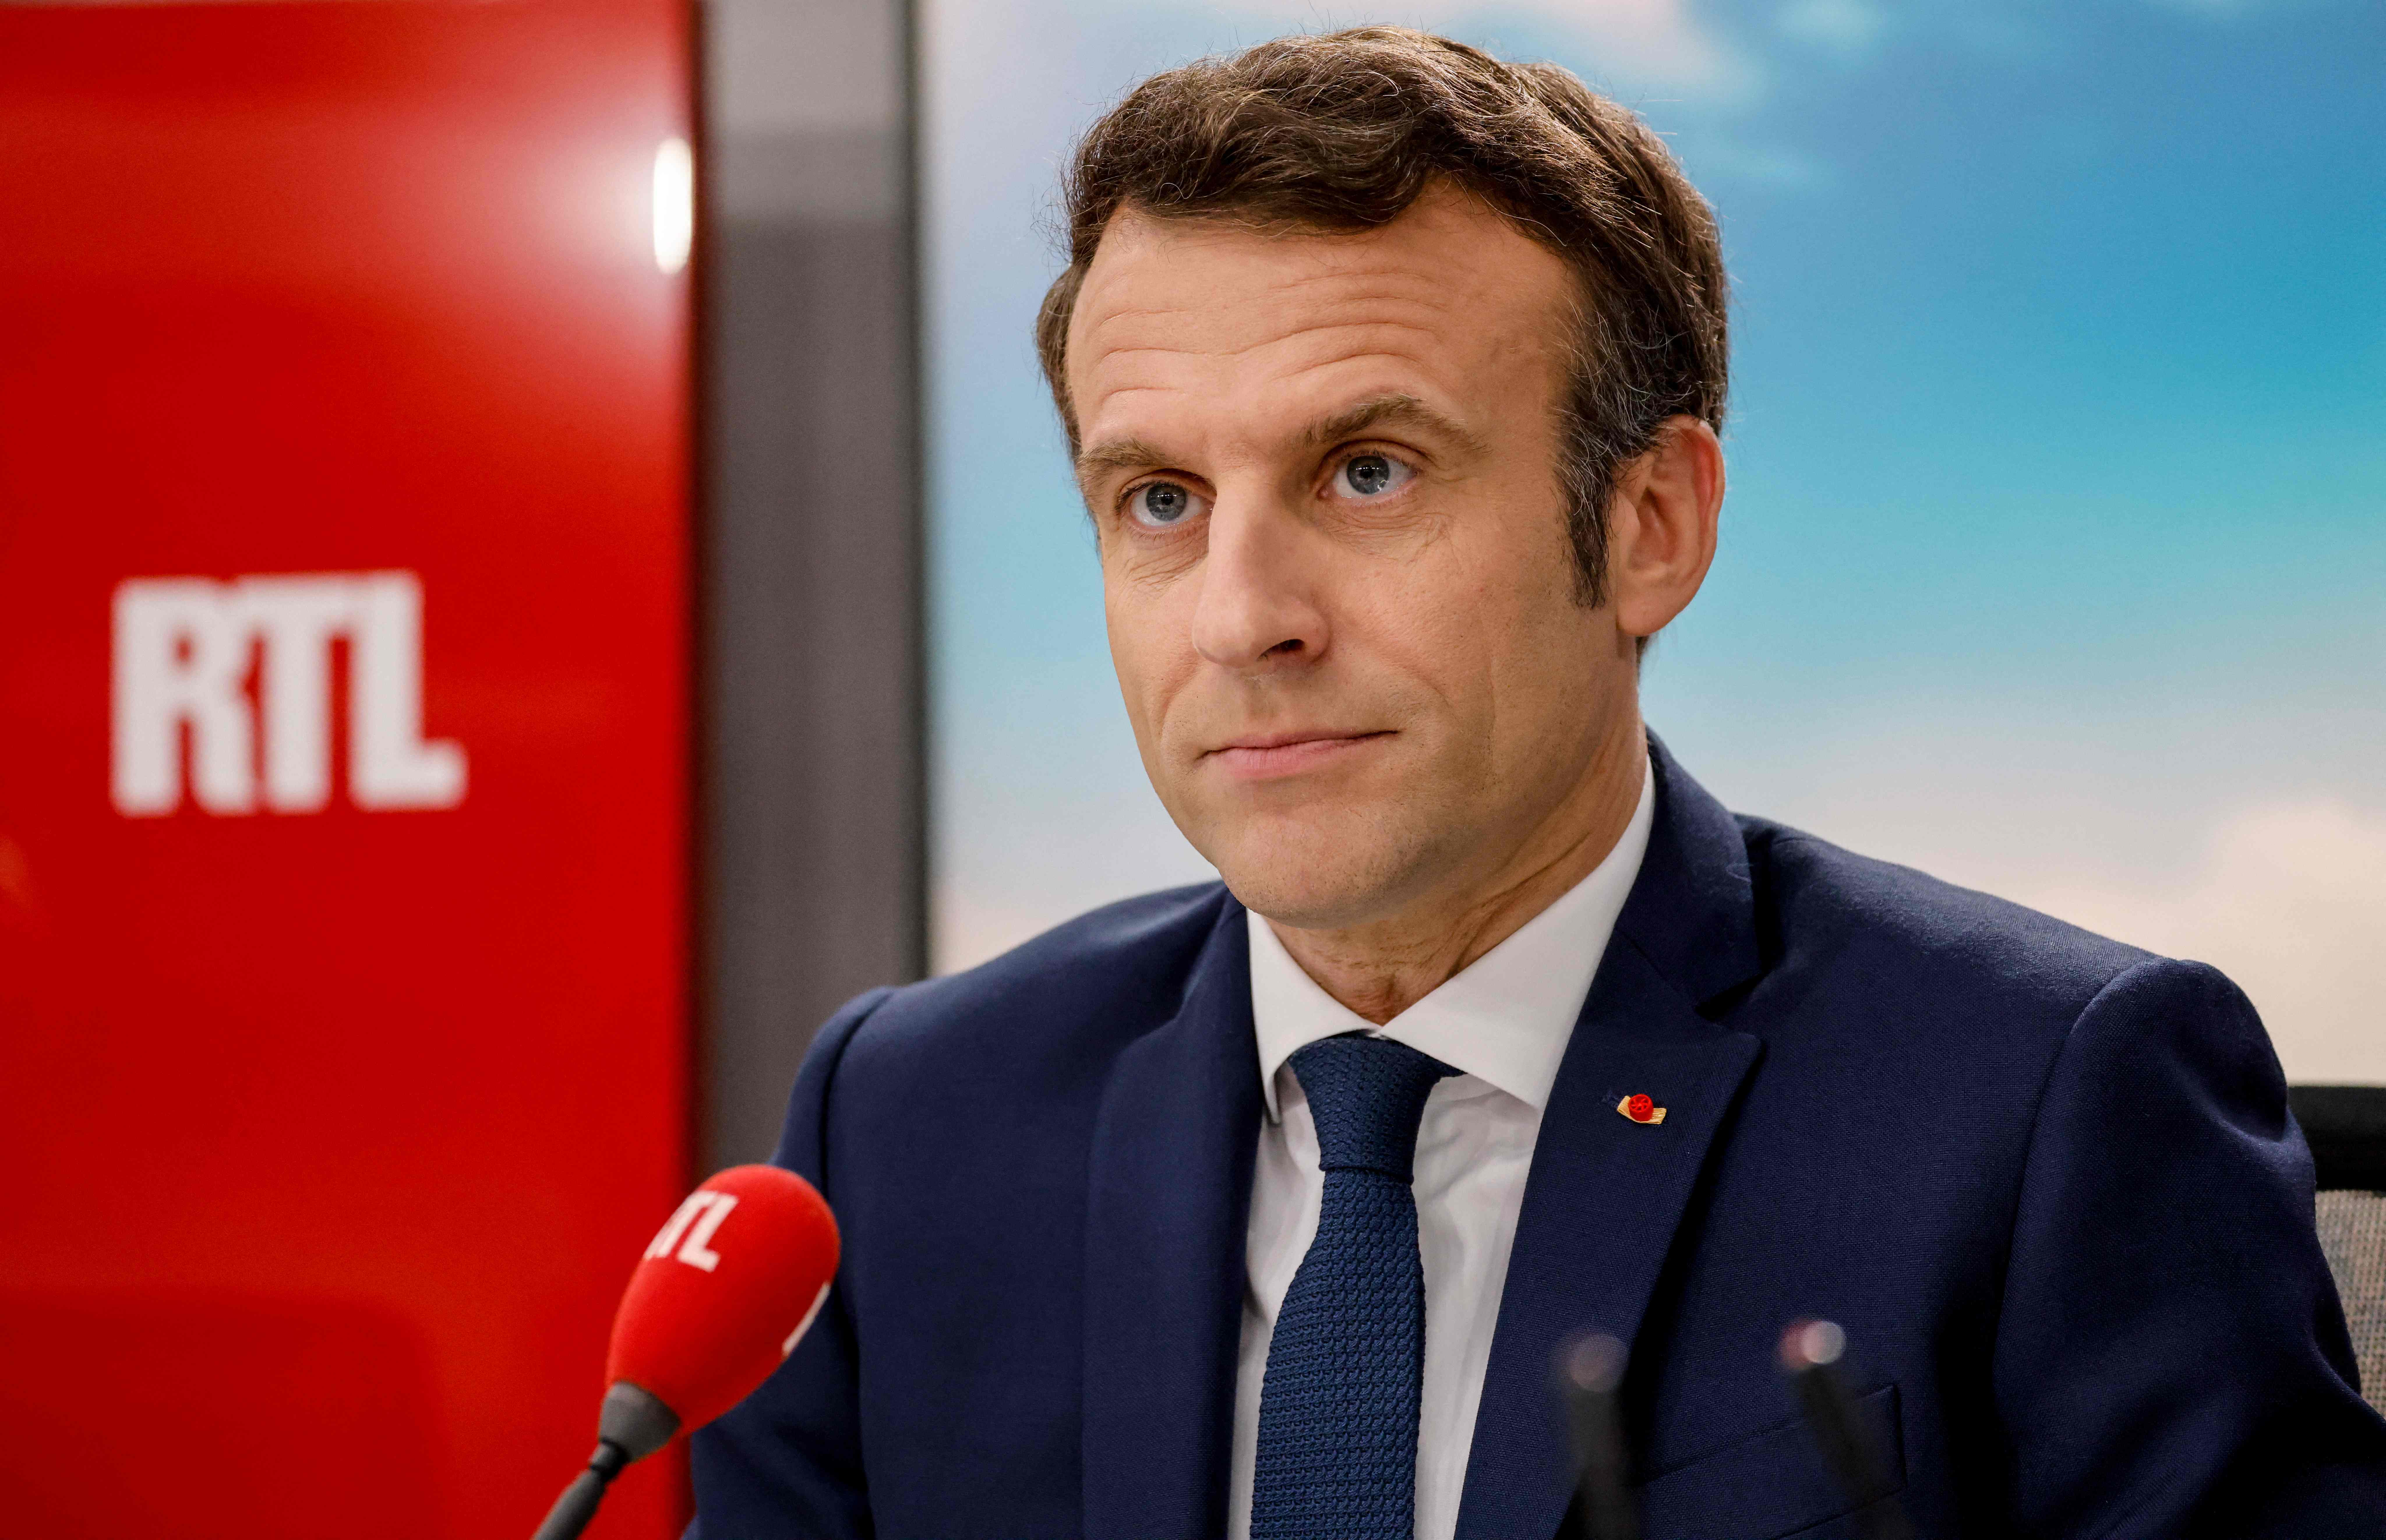 Macron poses before a live interview in the studio of French private radio station RTL in Neuilly-sur-Seine, 8 April 2022